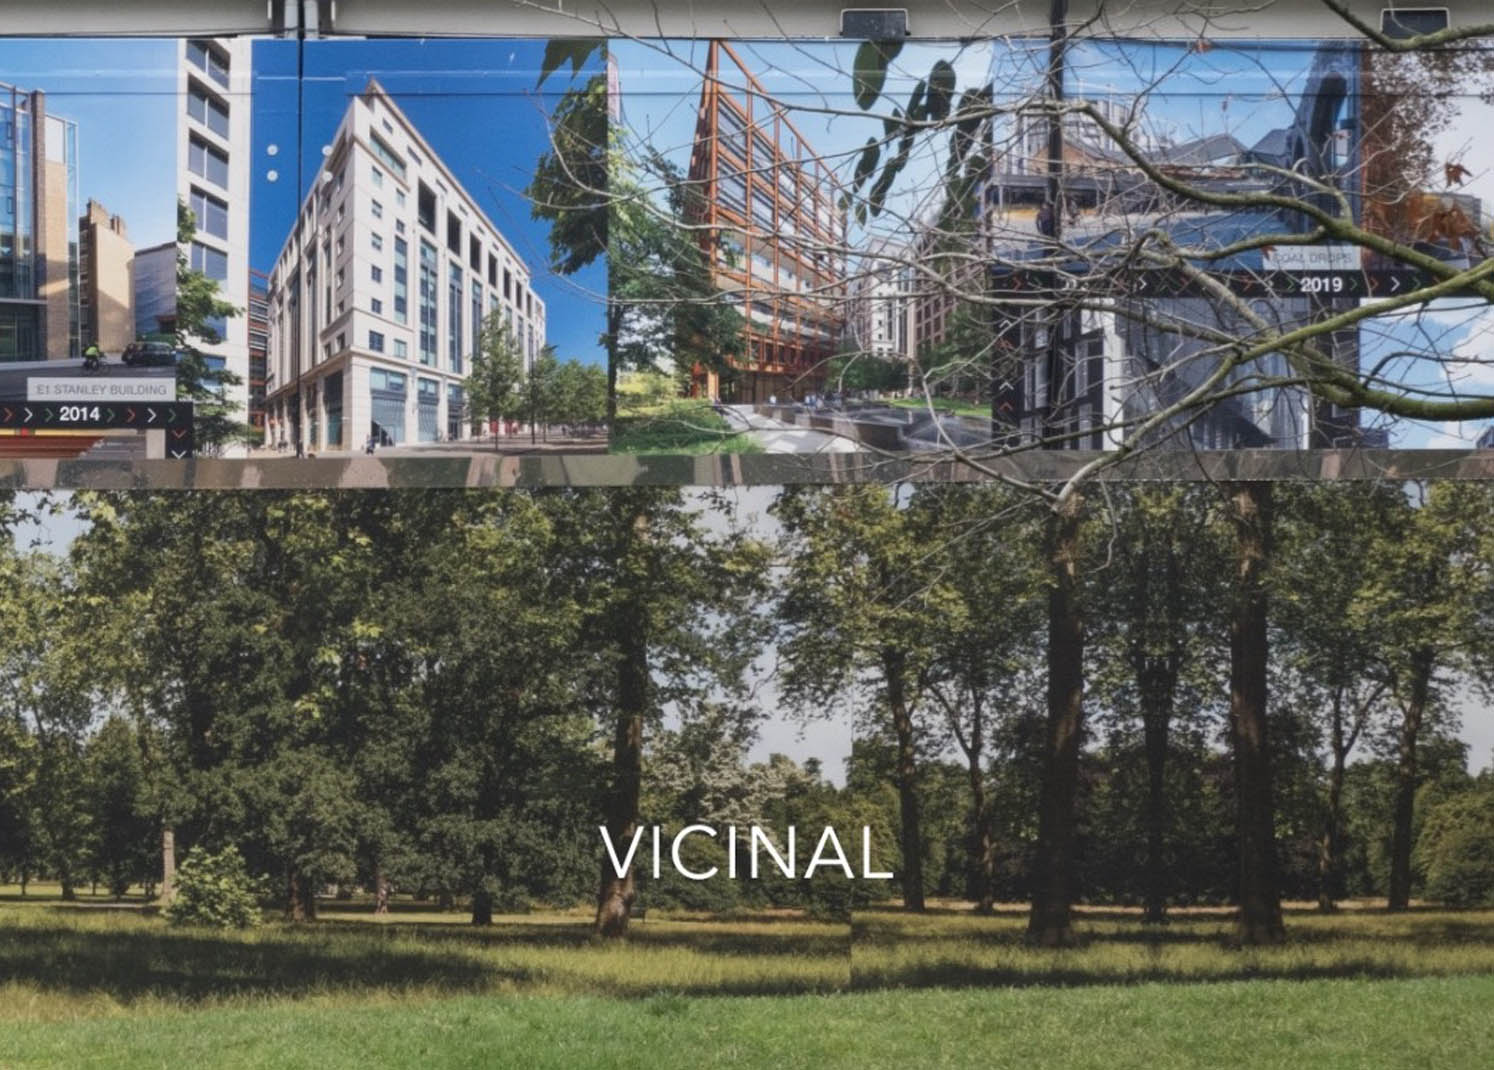 Book cover showing an image of a hoarding of trees and buildings with the title Vicinal overlaid